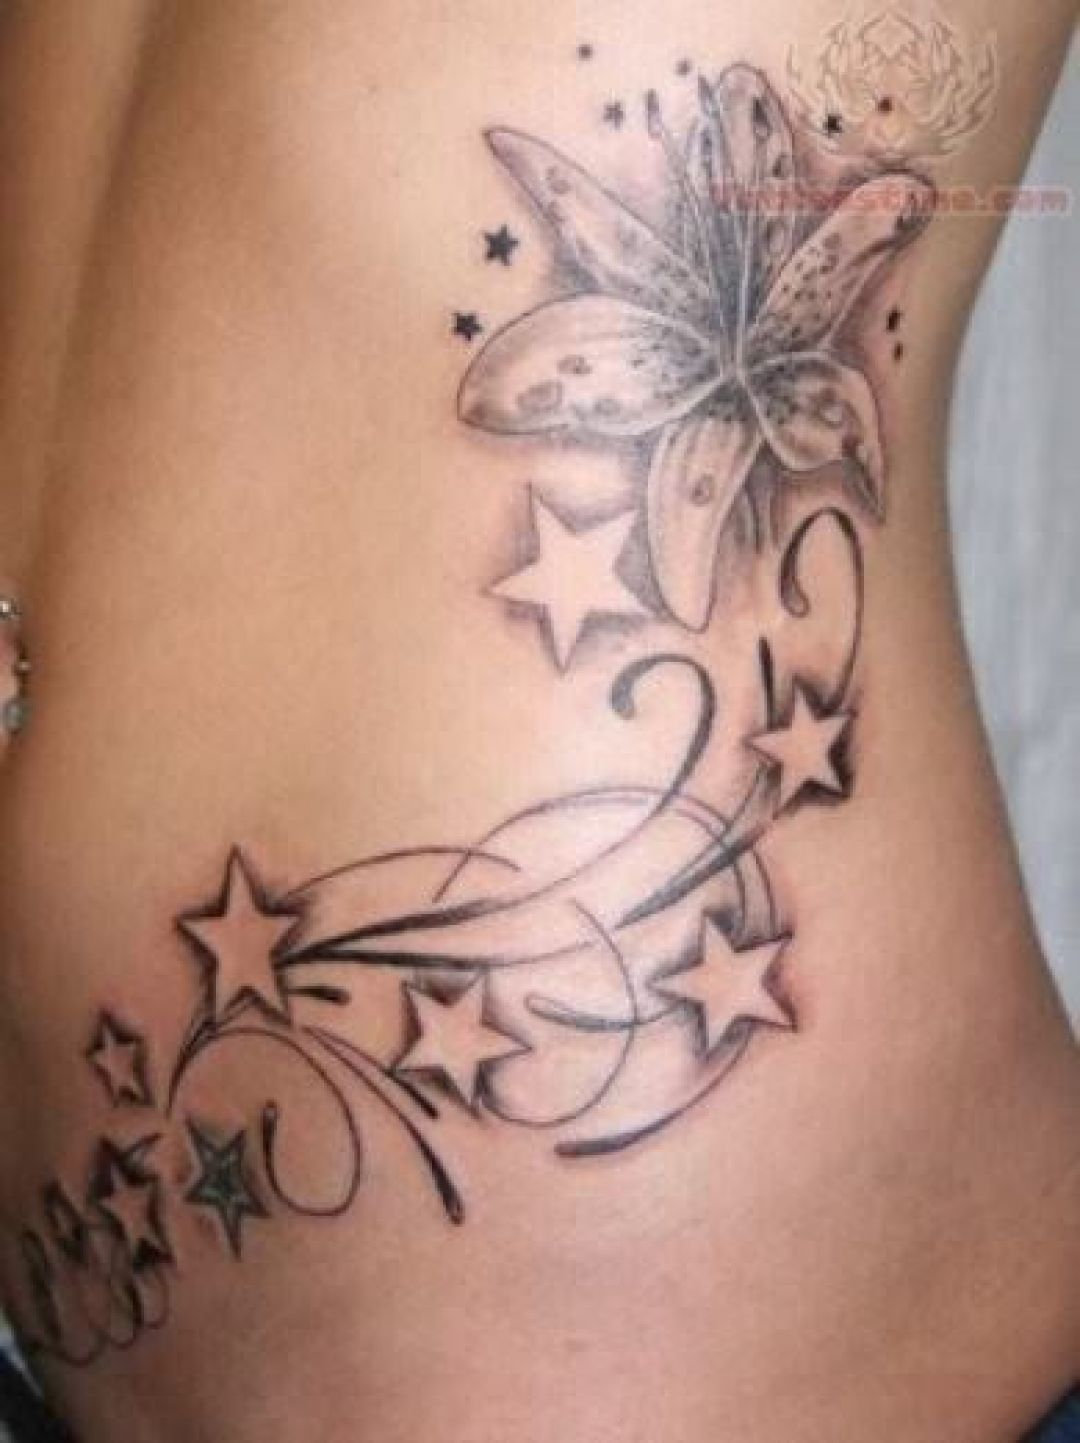 Details 96+ about flower and vine tattoos best .vn